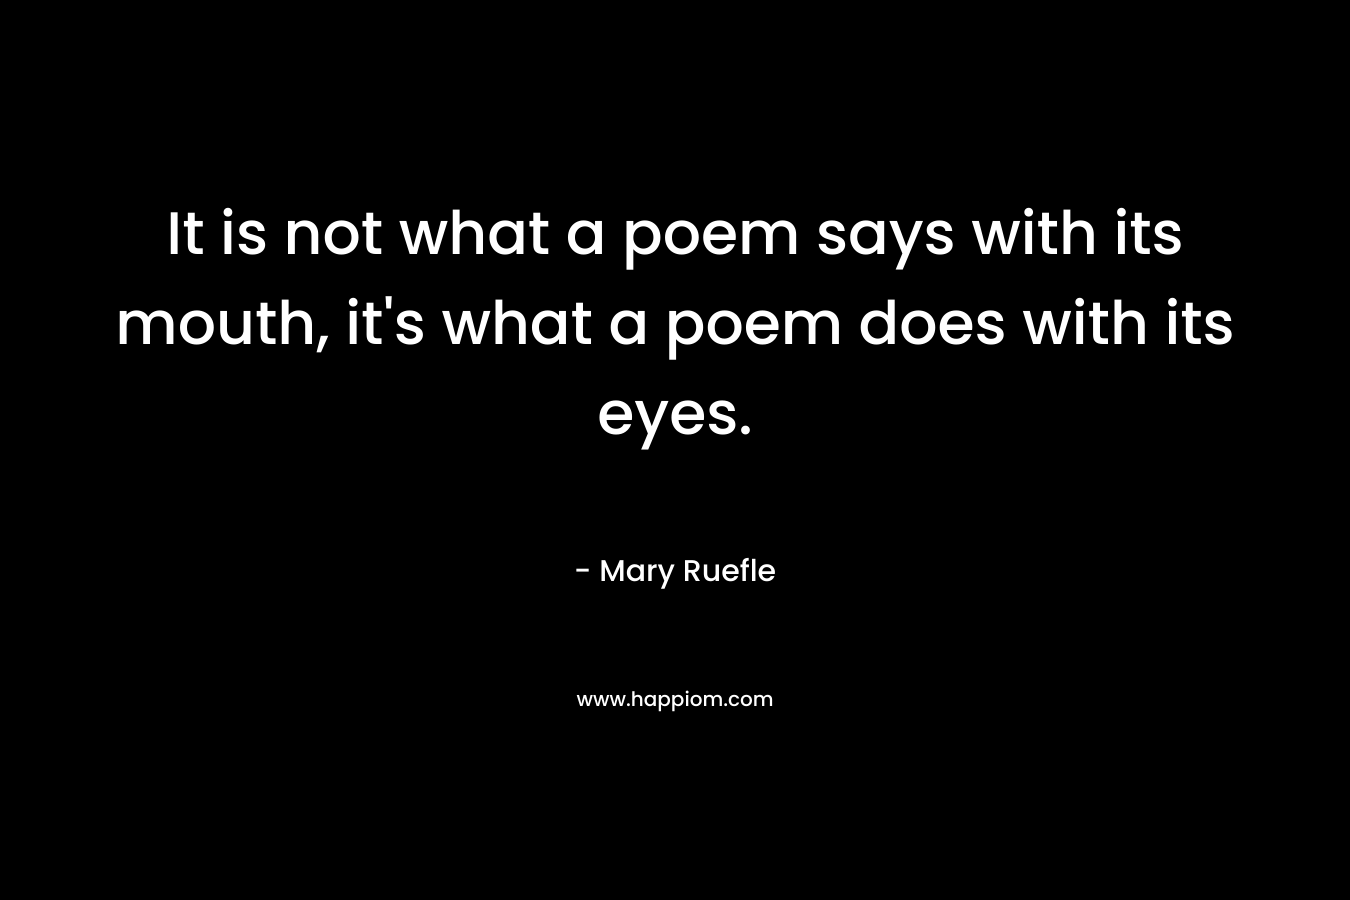 It is not what a poem says with its mouth, it’s what a poem does with its eyes. – Mary Ruefle